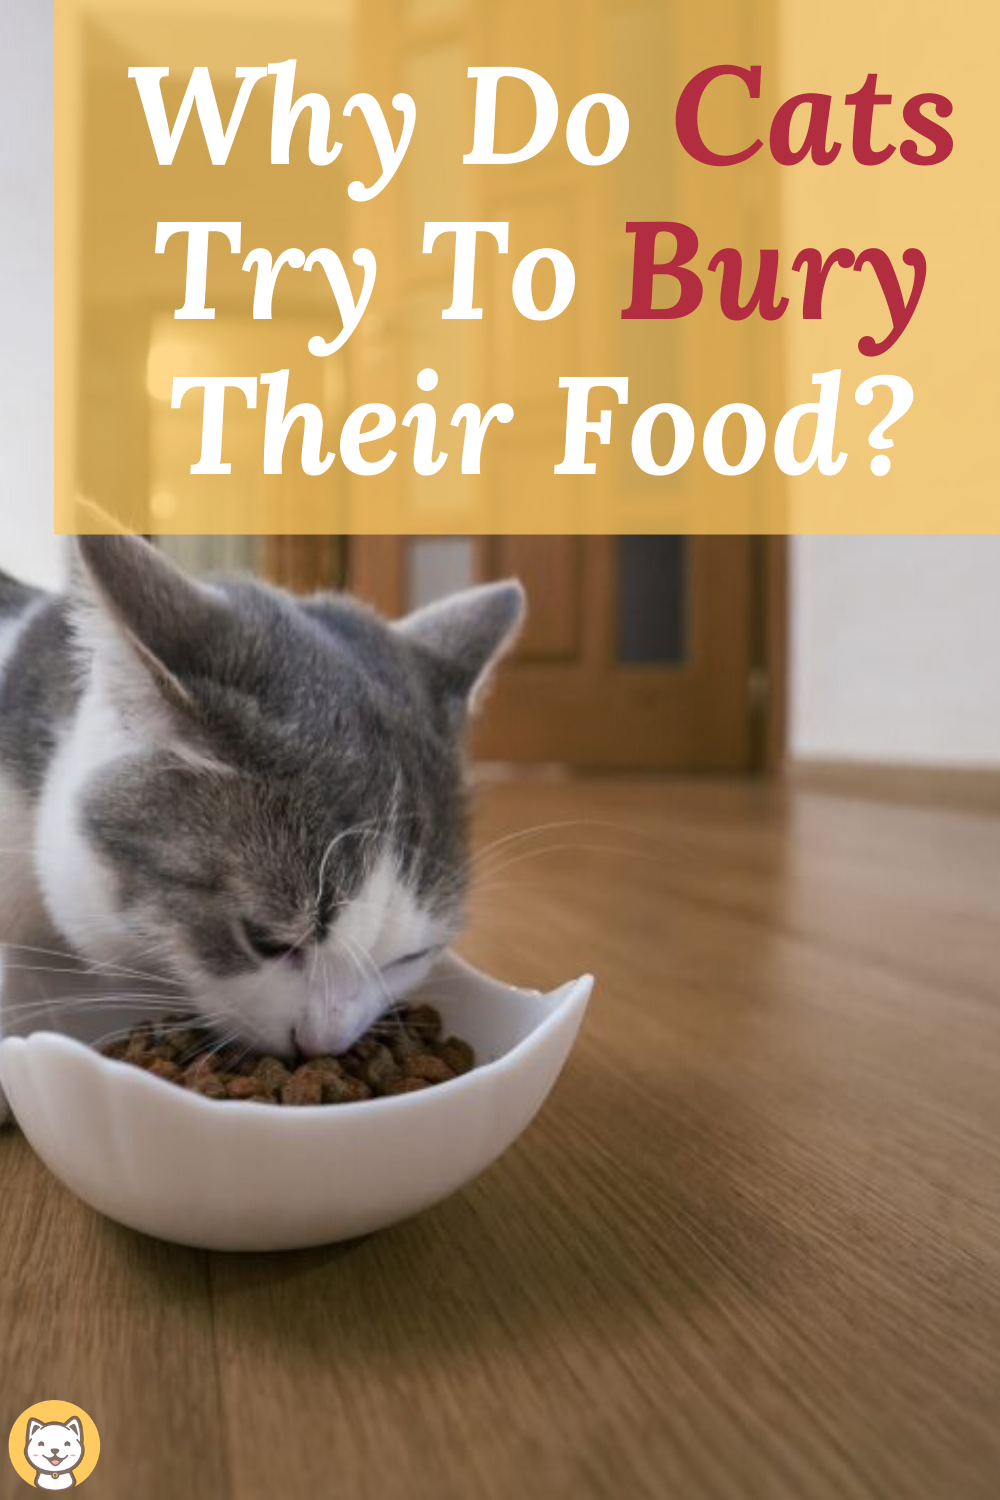 Why Do Cats Try To Bury Their Food?